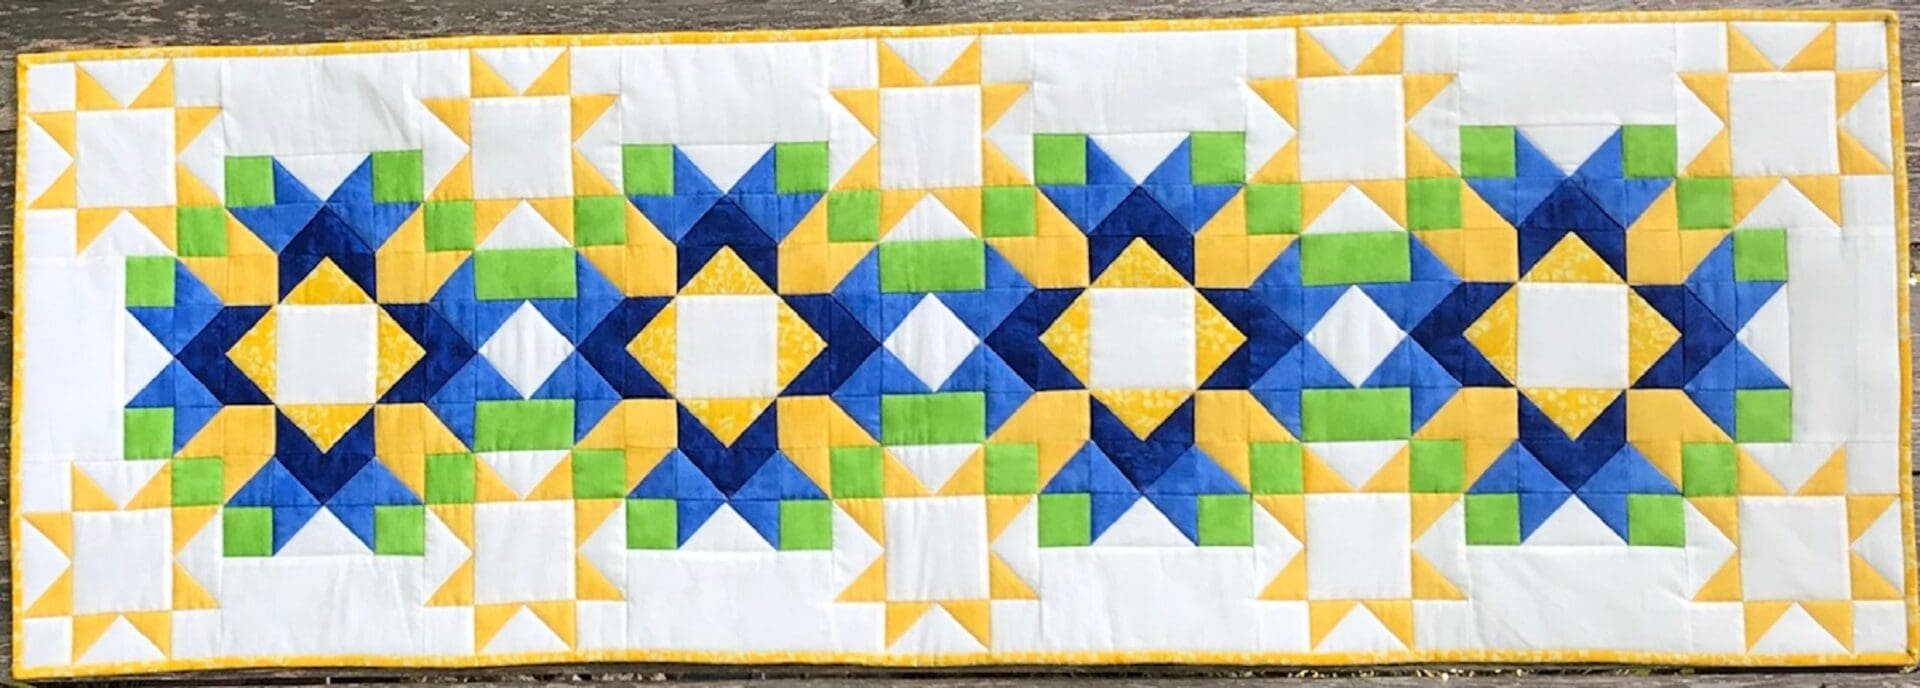 A table runner with blue, yellow and green designs.